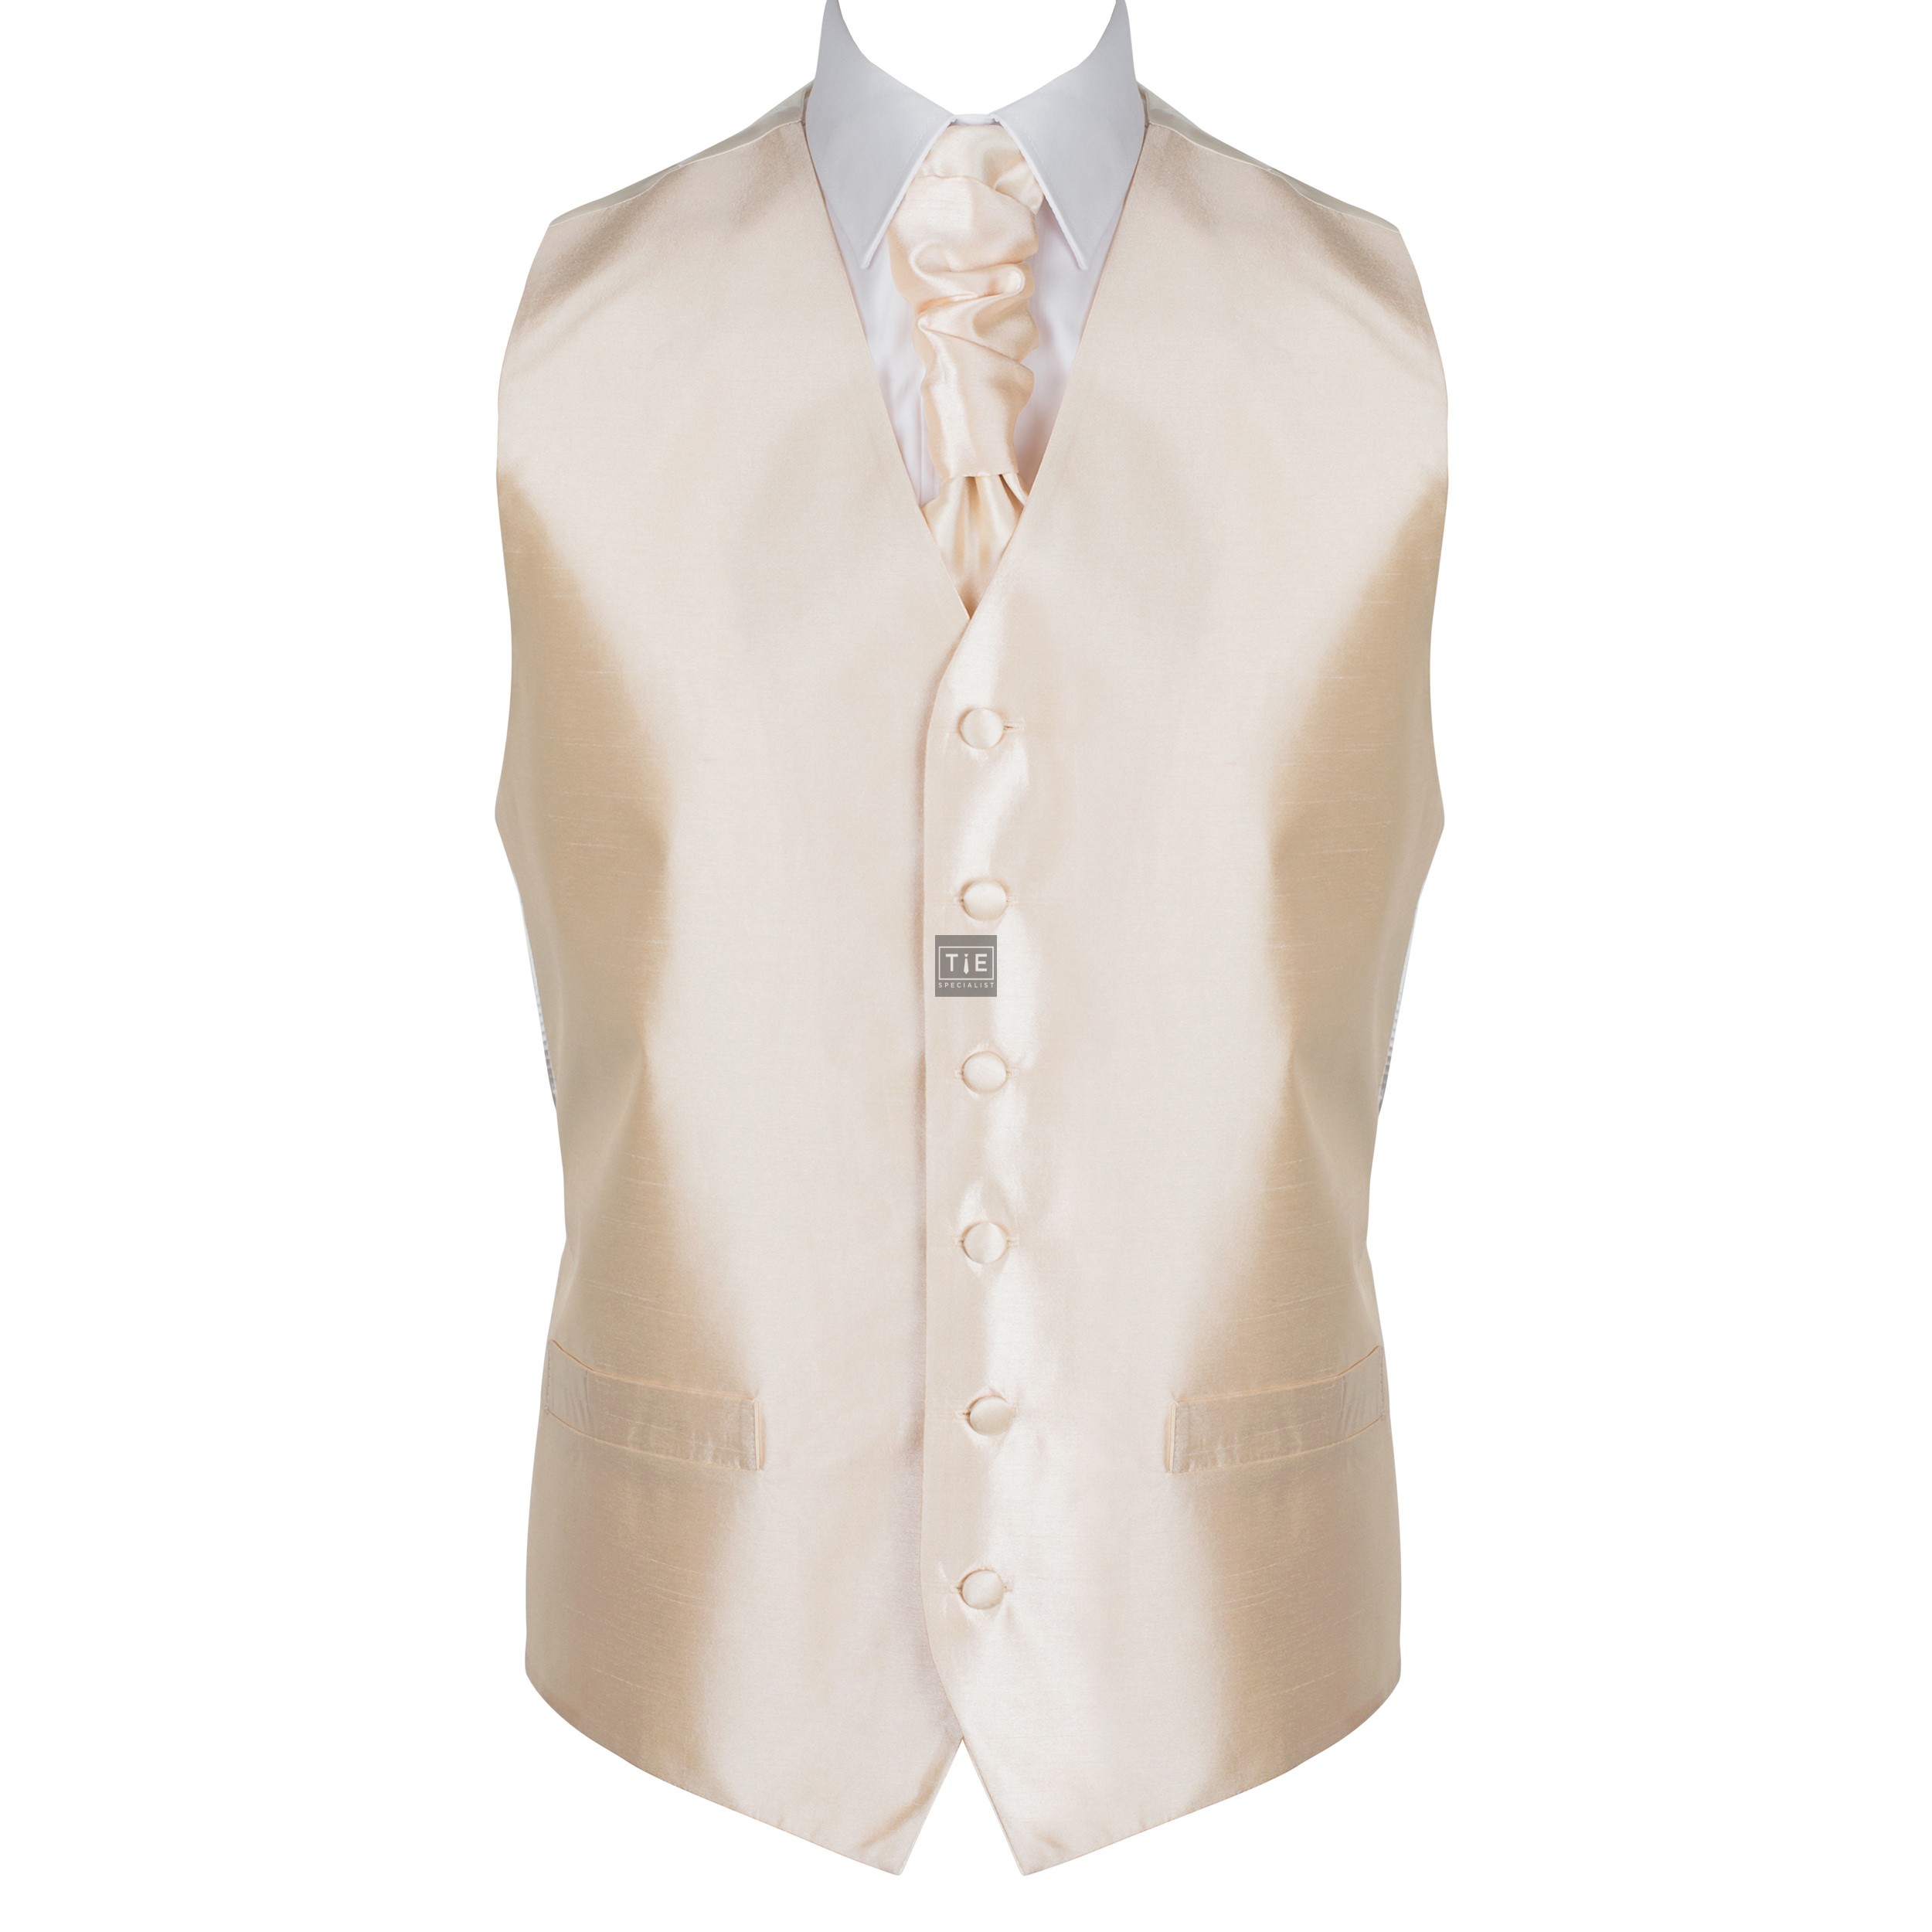 Butter Cream Morning Suit Waistcoat #AB-WWB1005/4